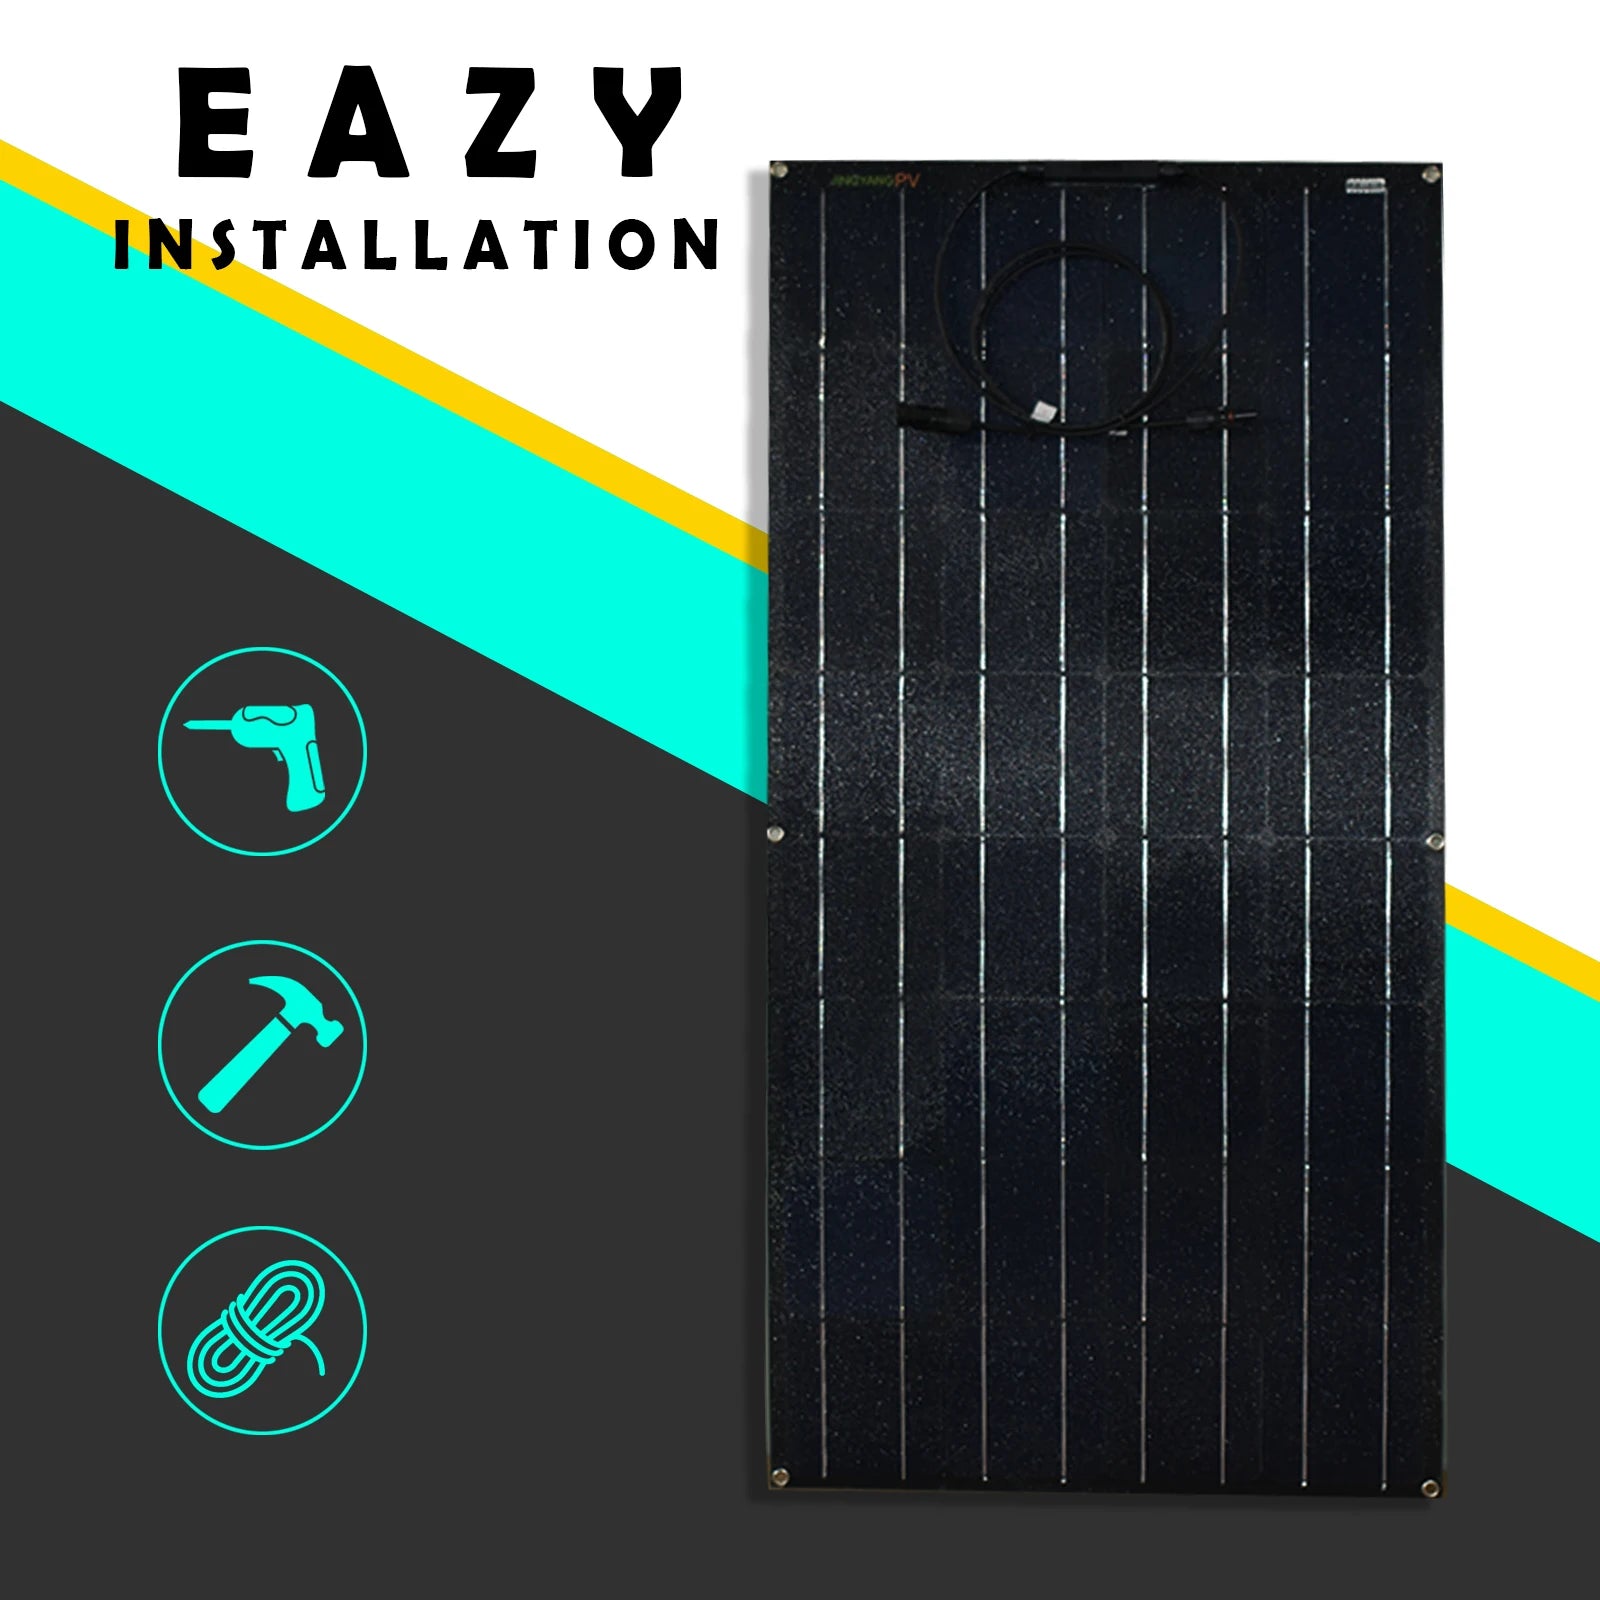 JINGYANG long lasting Semi Flexible solar panel, Waterproof and snowproof coating with resistance to small hail, perfect for outdoor use.